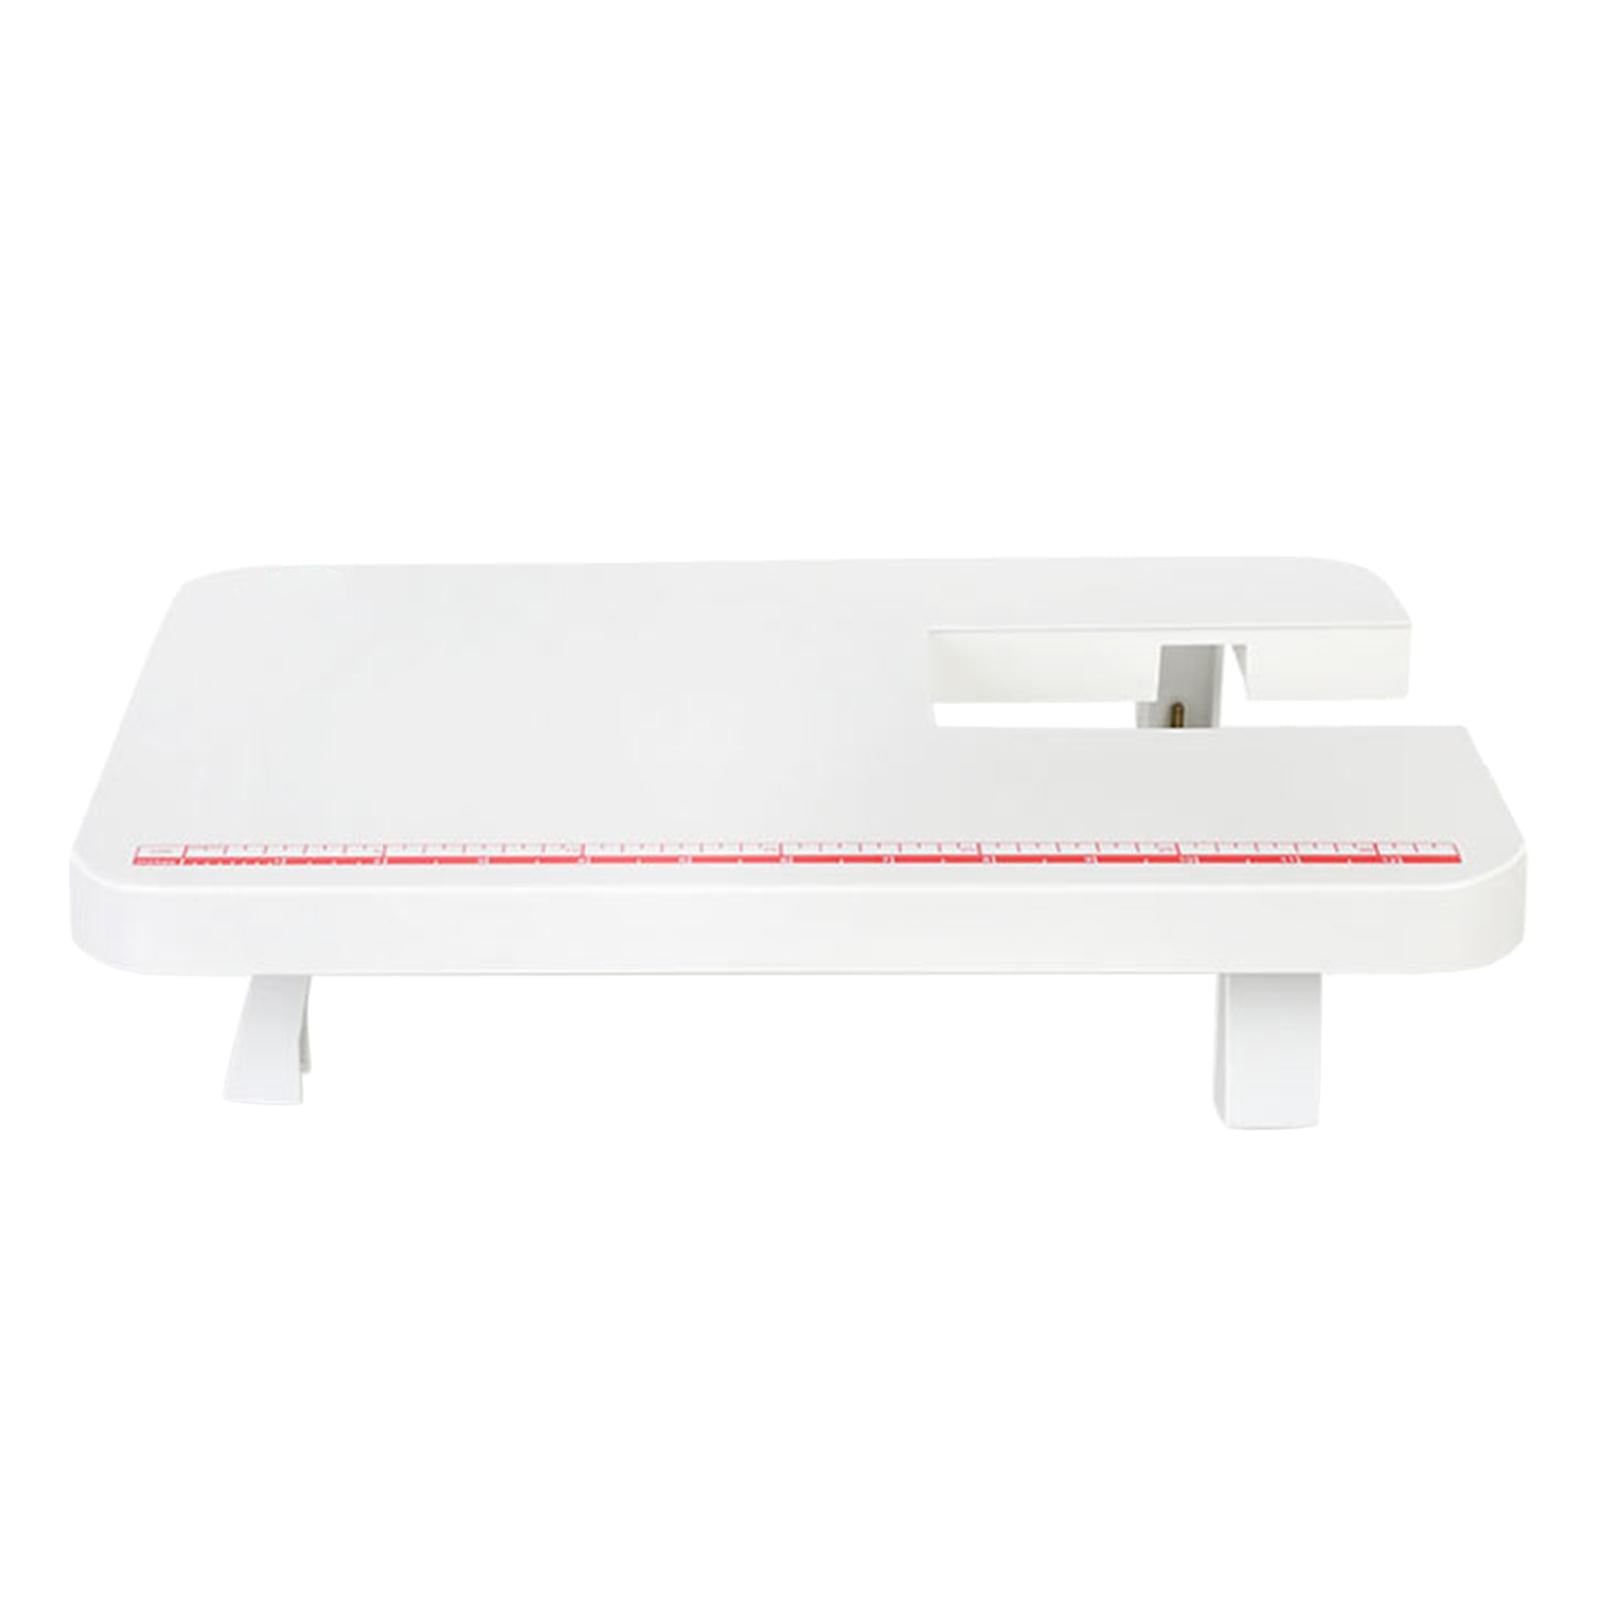 Portable Sewing Machine Table Foldable Extension Board Flexible